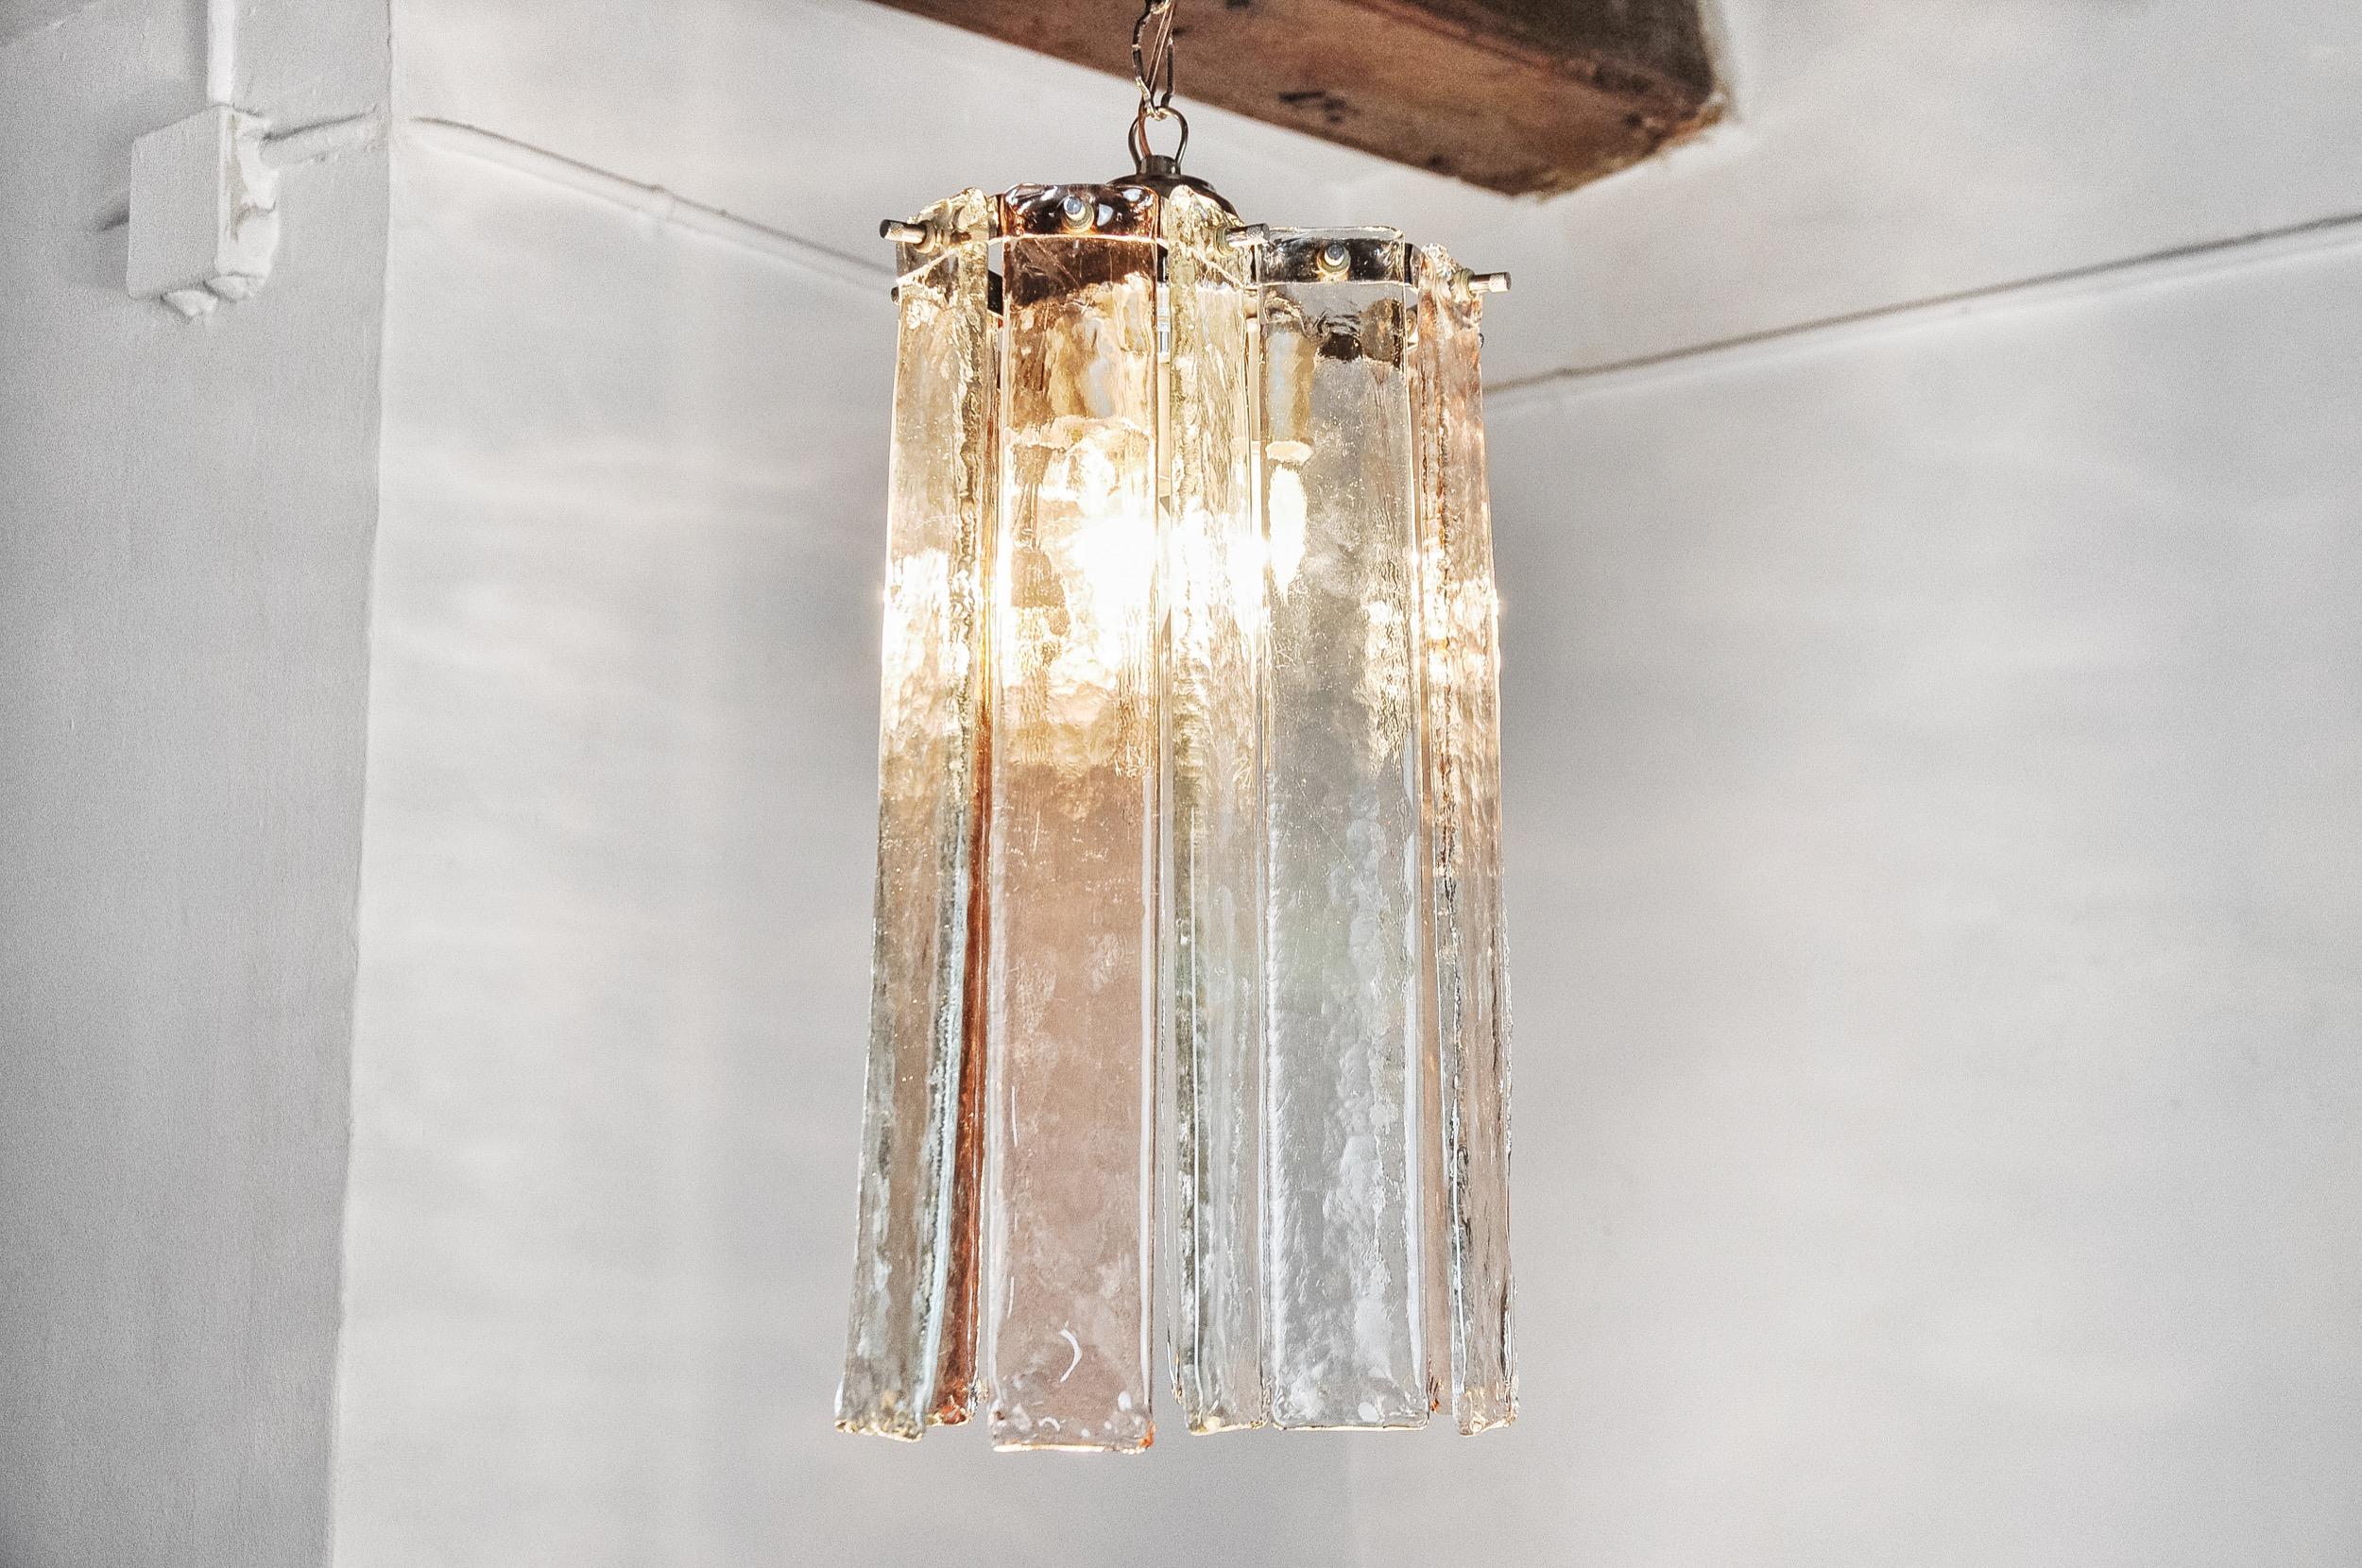 Superb and rare Poliarte chandelier by Albano Poli, designed and produced in Italy, in the 1970s. This chandelier is composed of thick pink and transparent glass rods, frosted, suspended from a silver metal structure. The glass work was done in